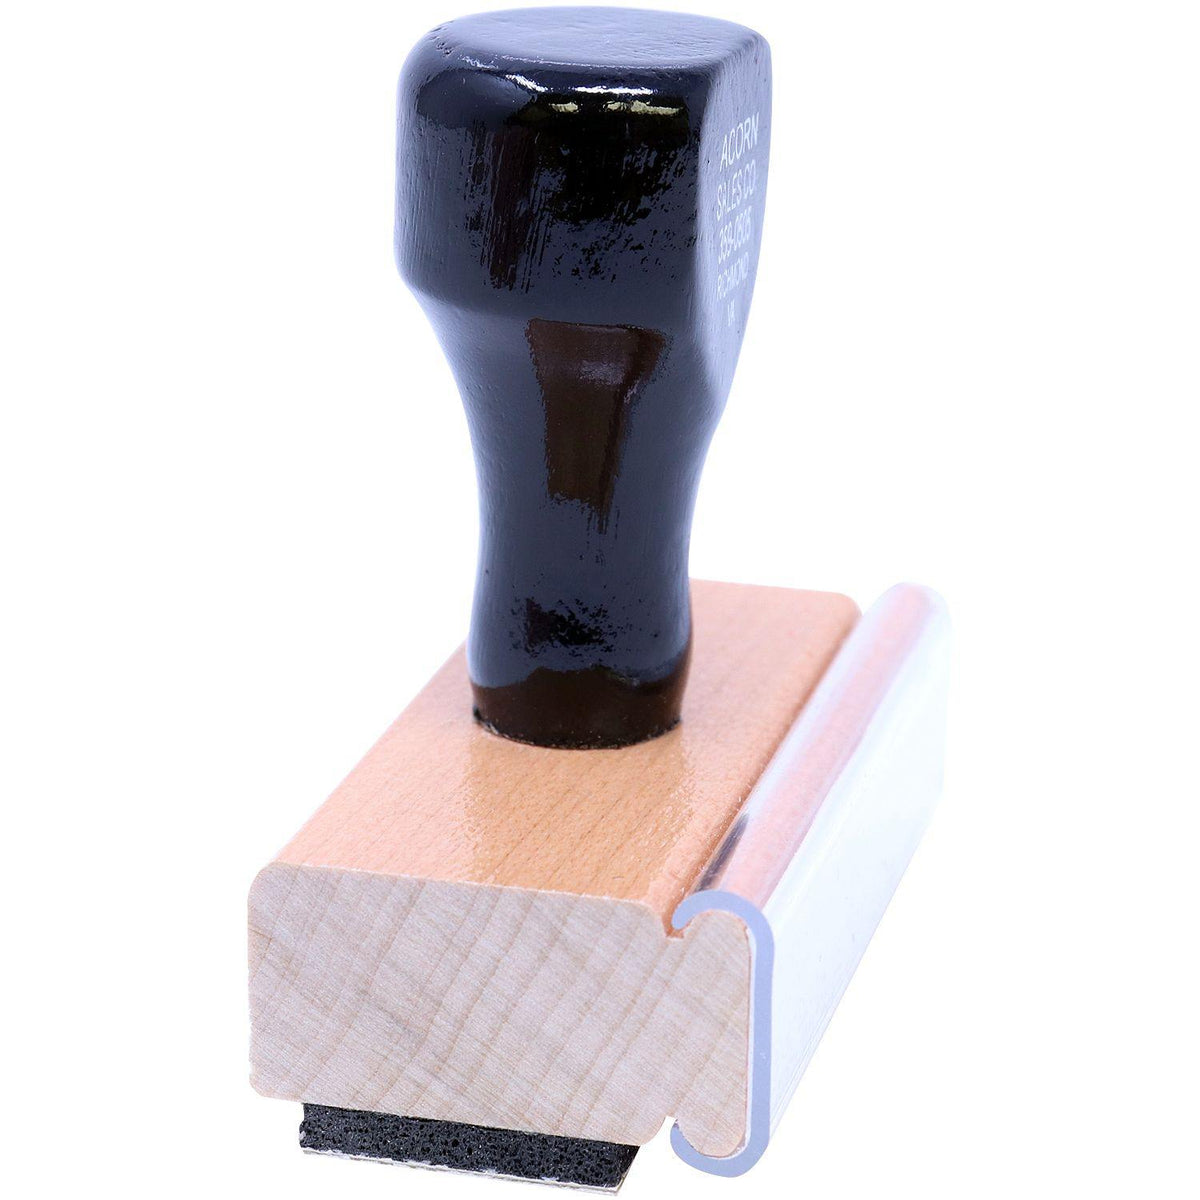 Side View of Large Italic Rush Rubber Stamp at an Angle